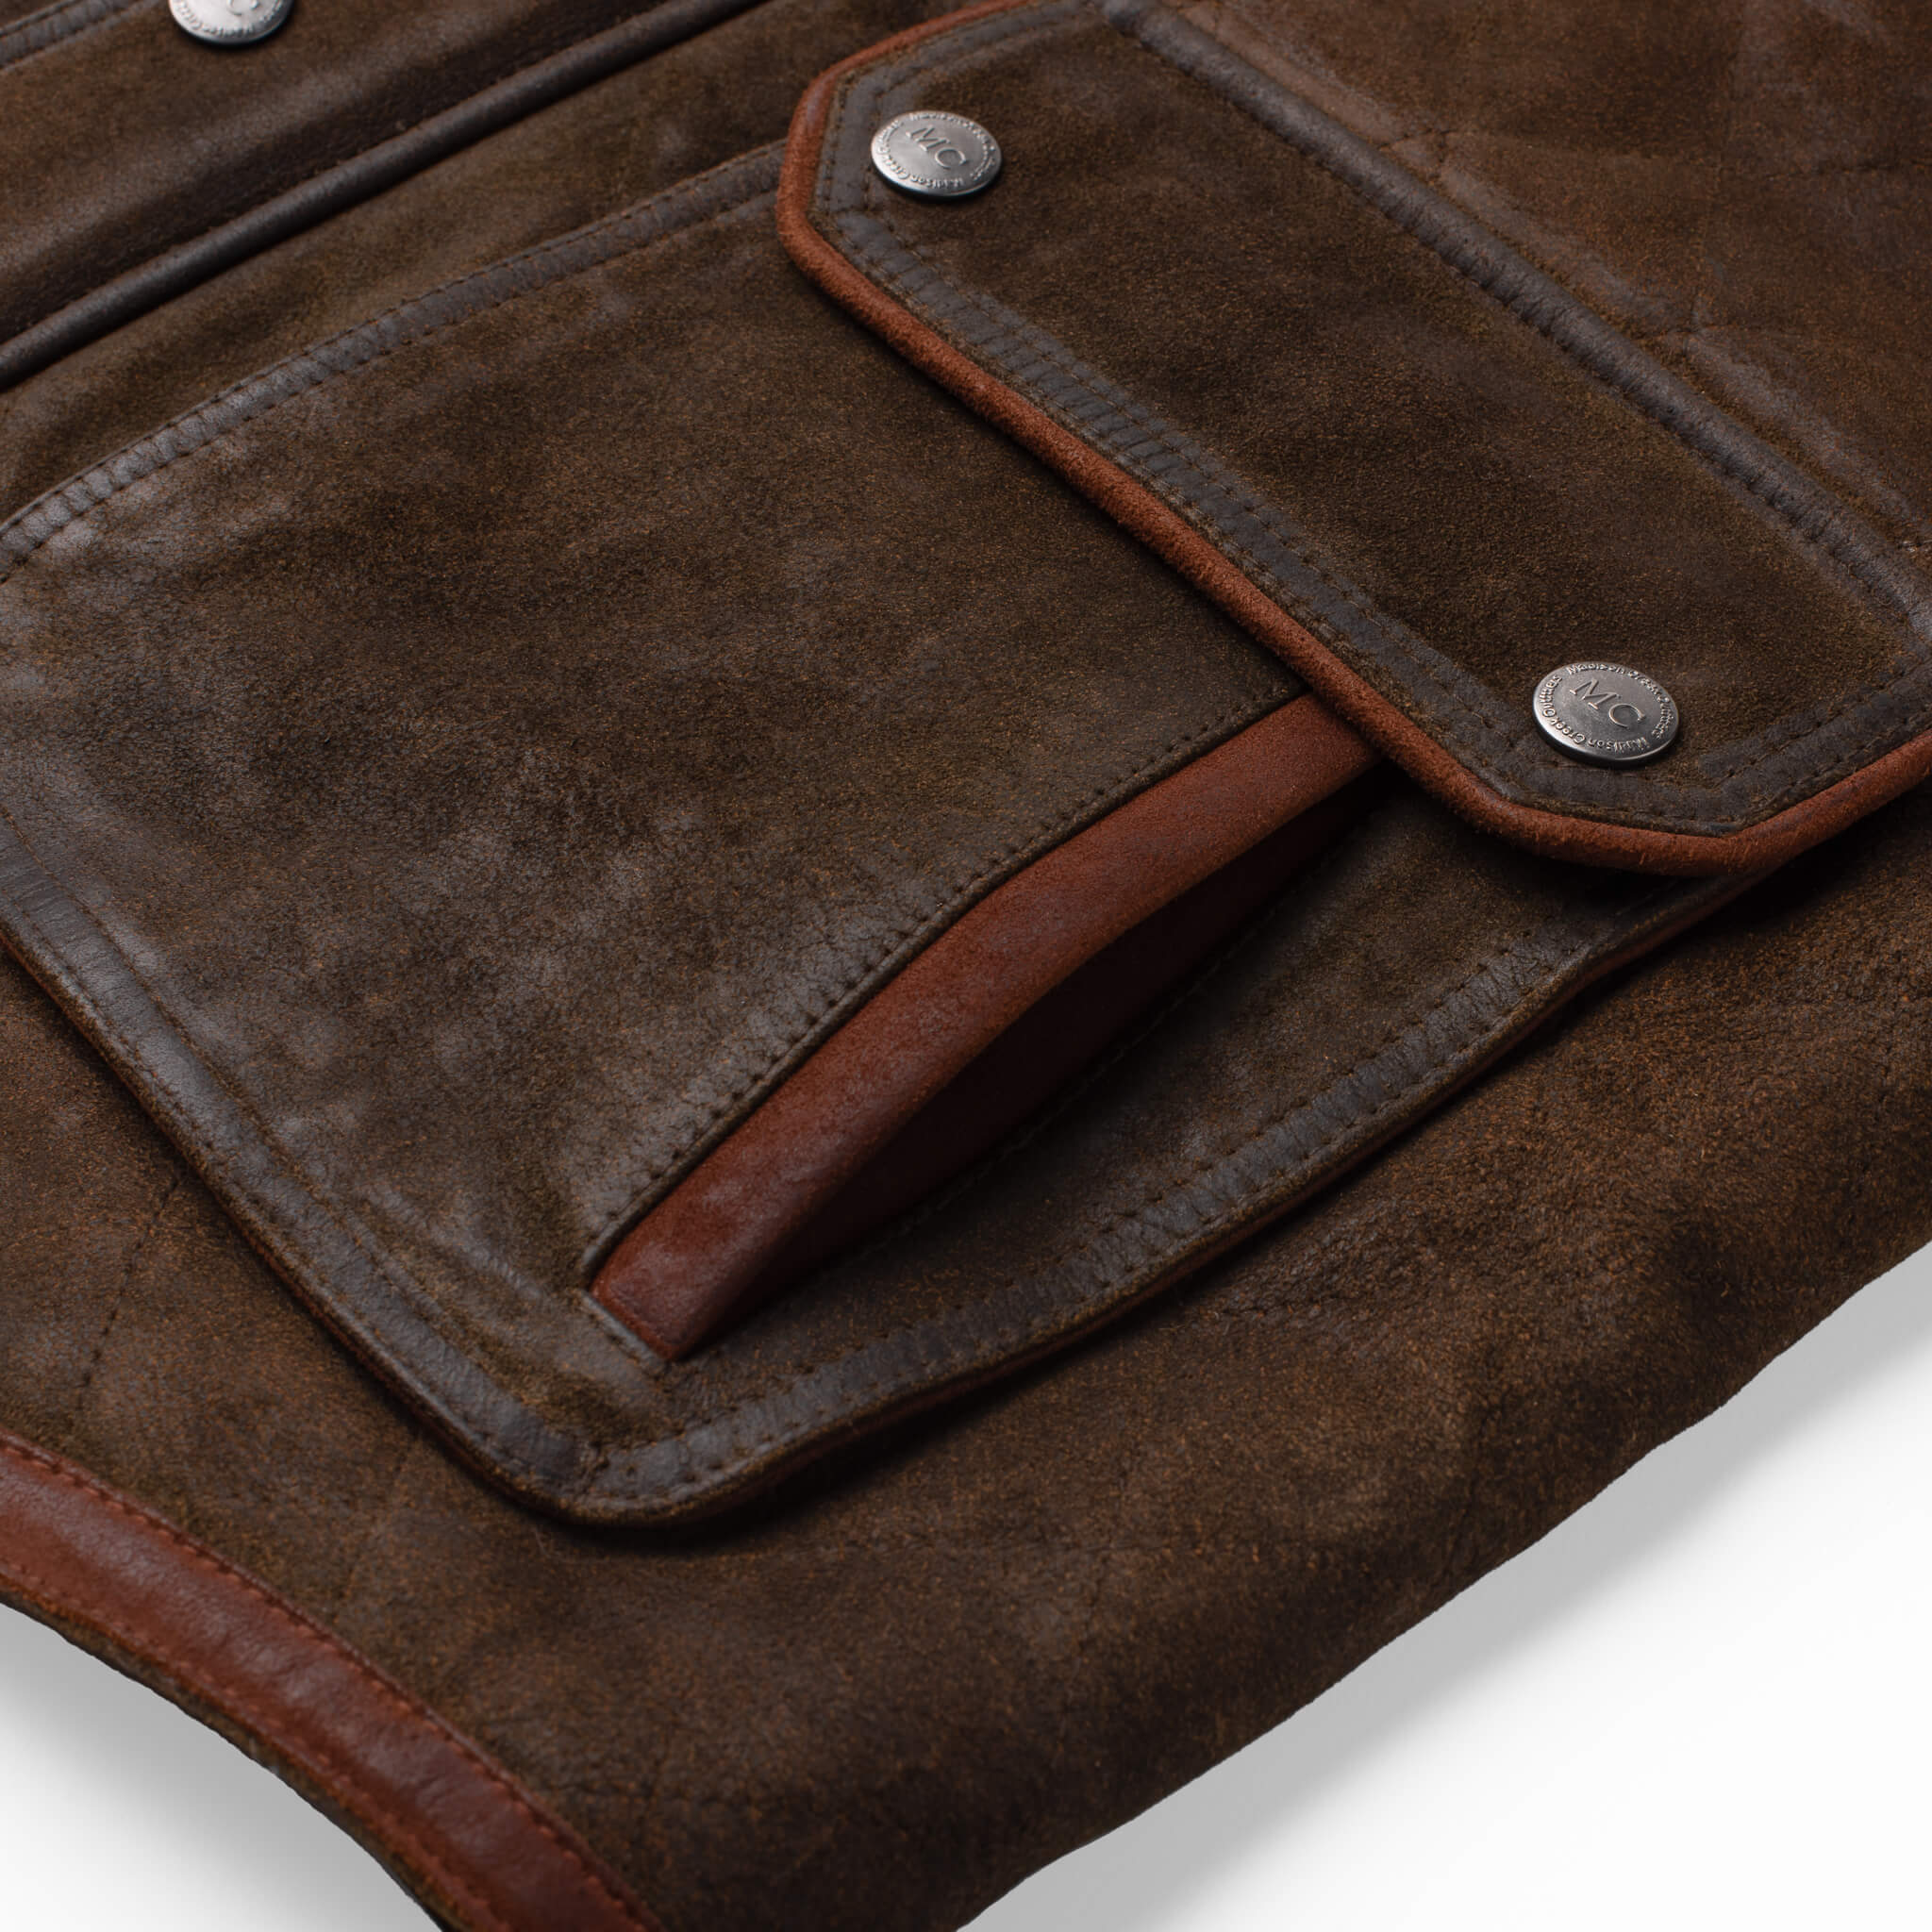 Leather and Goat Skin Bags